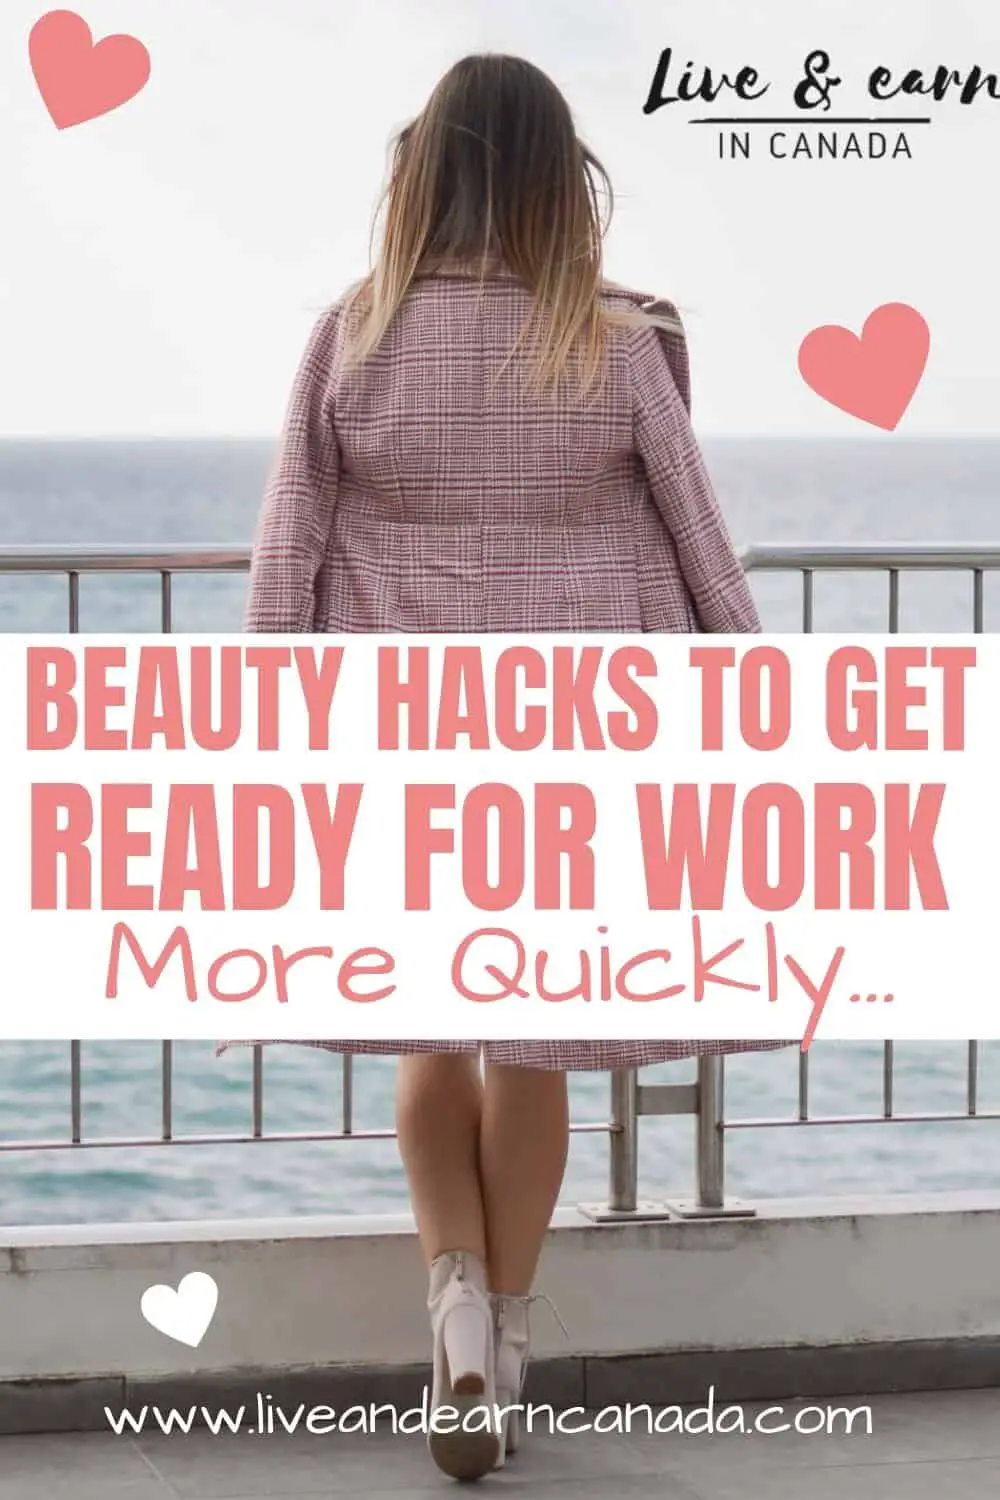 Beauty hacks for women! Here are a few easy beauty hacks every girl should know about to get ready for work faster. Diy Makeup, Makeup Tricks, Beauty Tricks, Diy Beauty, Beauty Ideas, Beauty Tips For Teens, Beauty Life Hacks, Makeup Stuff, Beauty Advice #beautyhacks #beautytips